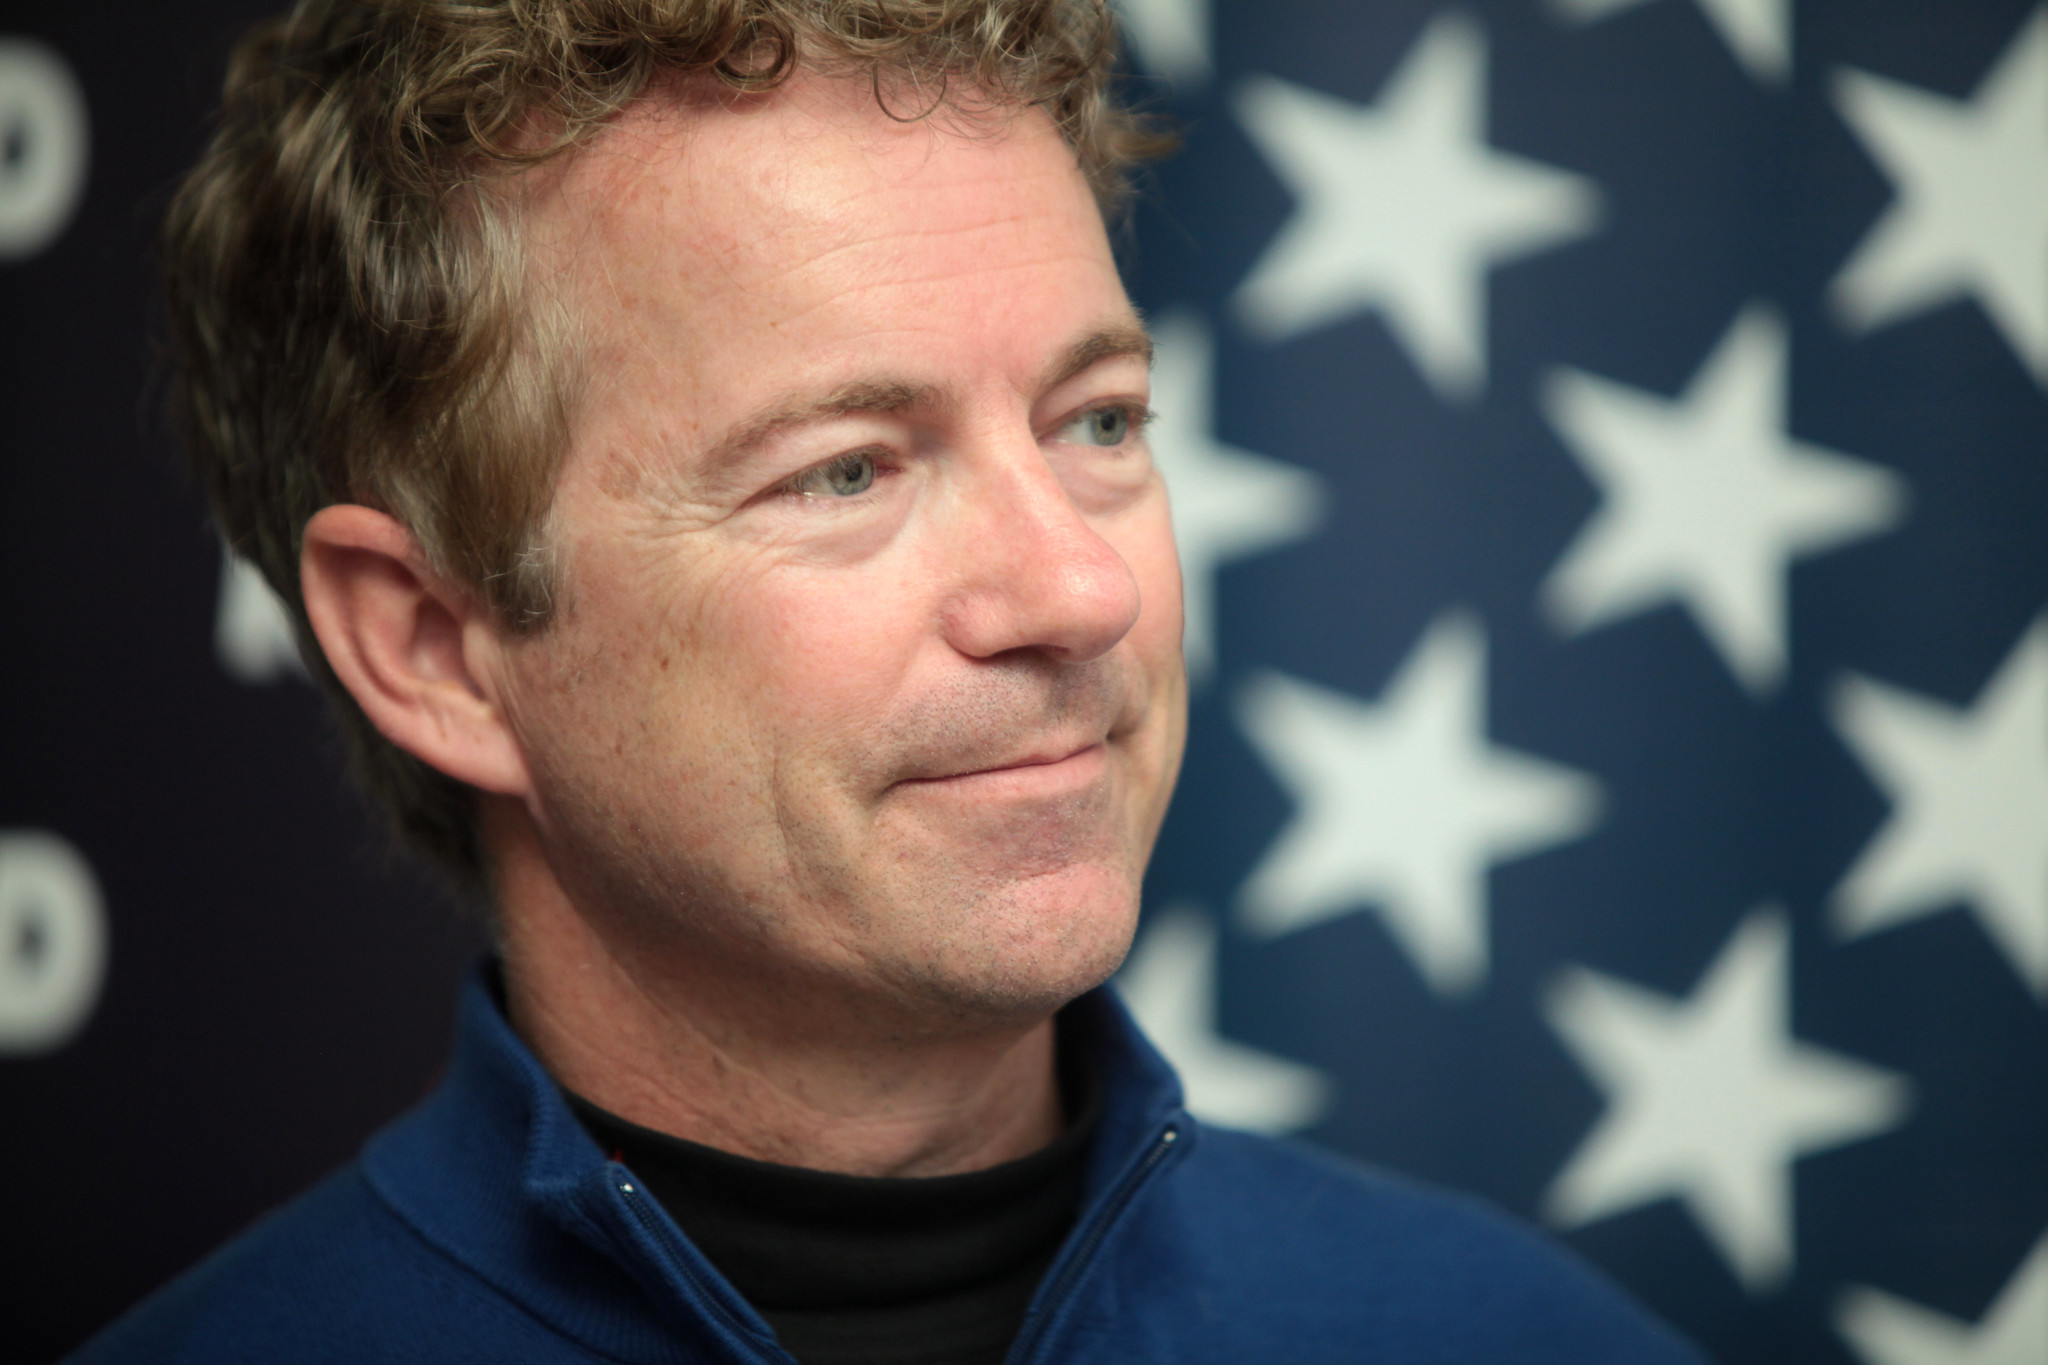 Rand Paul Says He Has Recovered from COVID-19 and is Volunteering at a ...